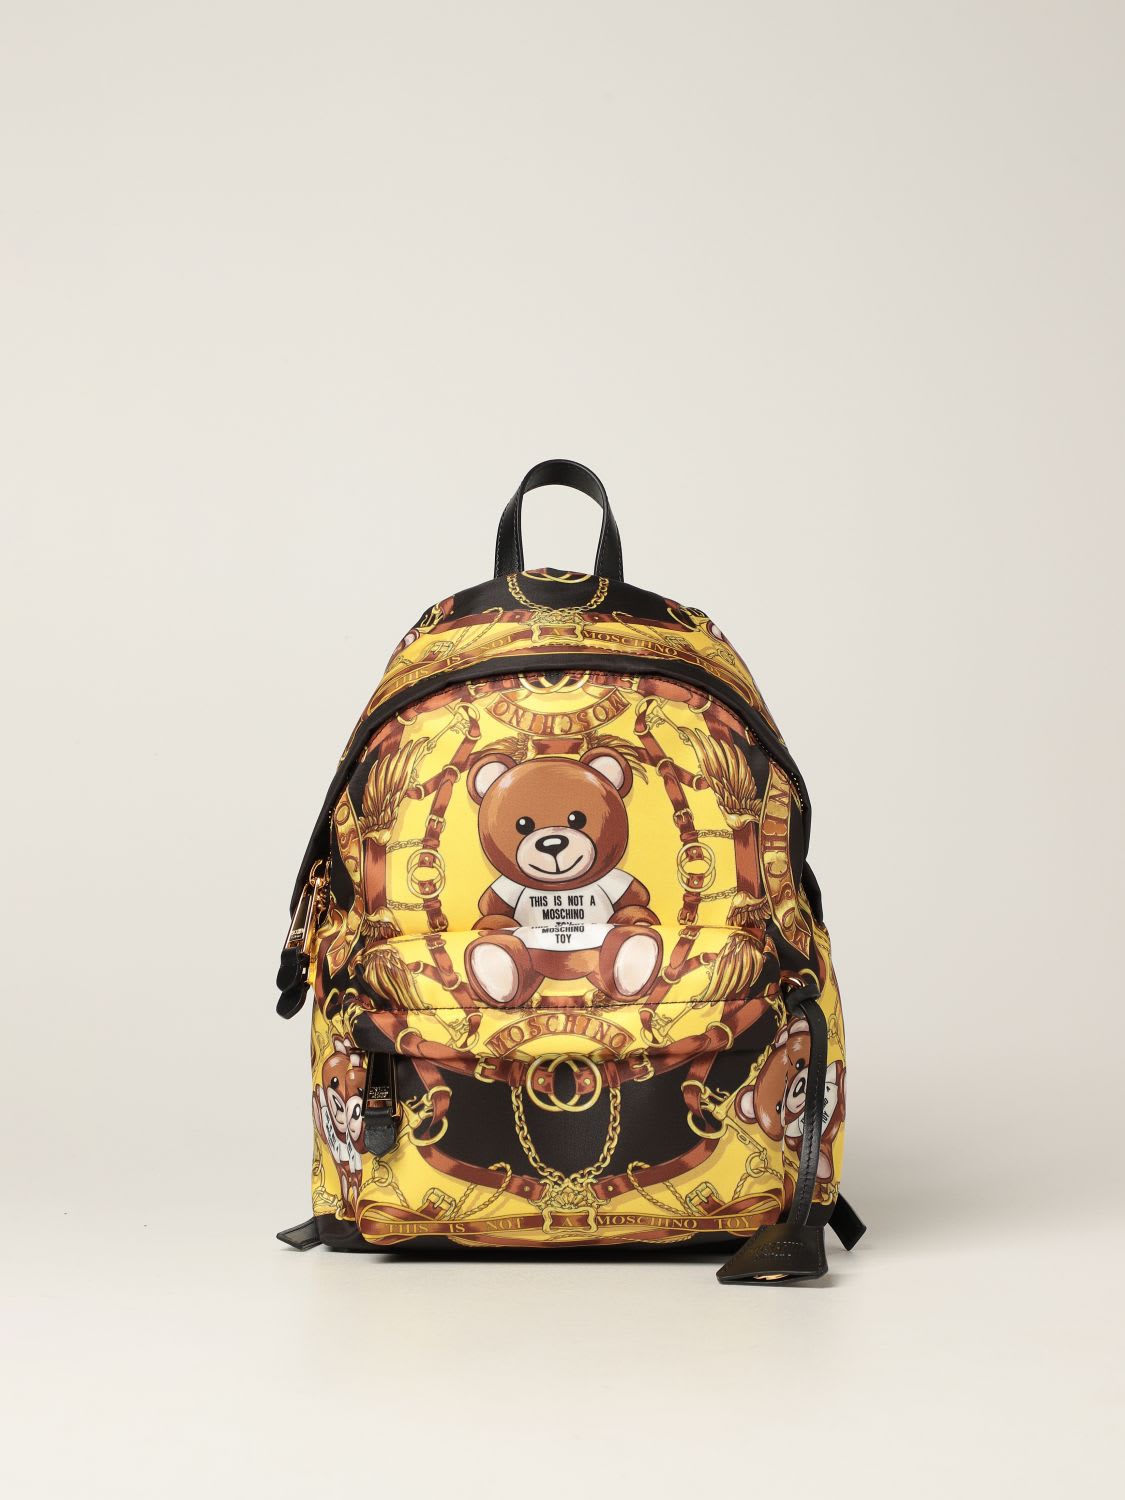 Moschino Couture Backpack Moschino Couture Nylon Backpack With Foulard And Teddy Print